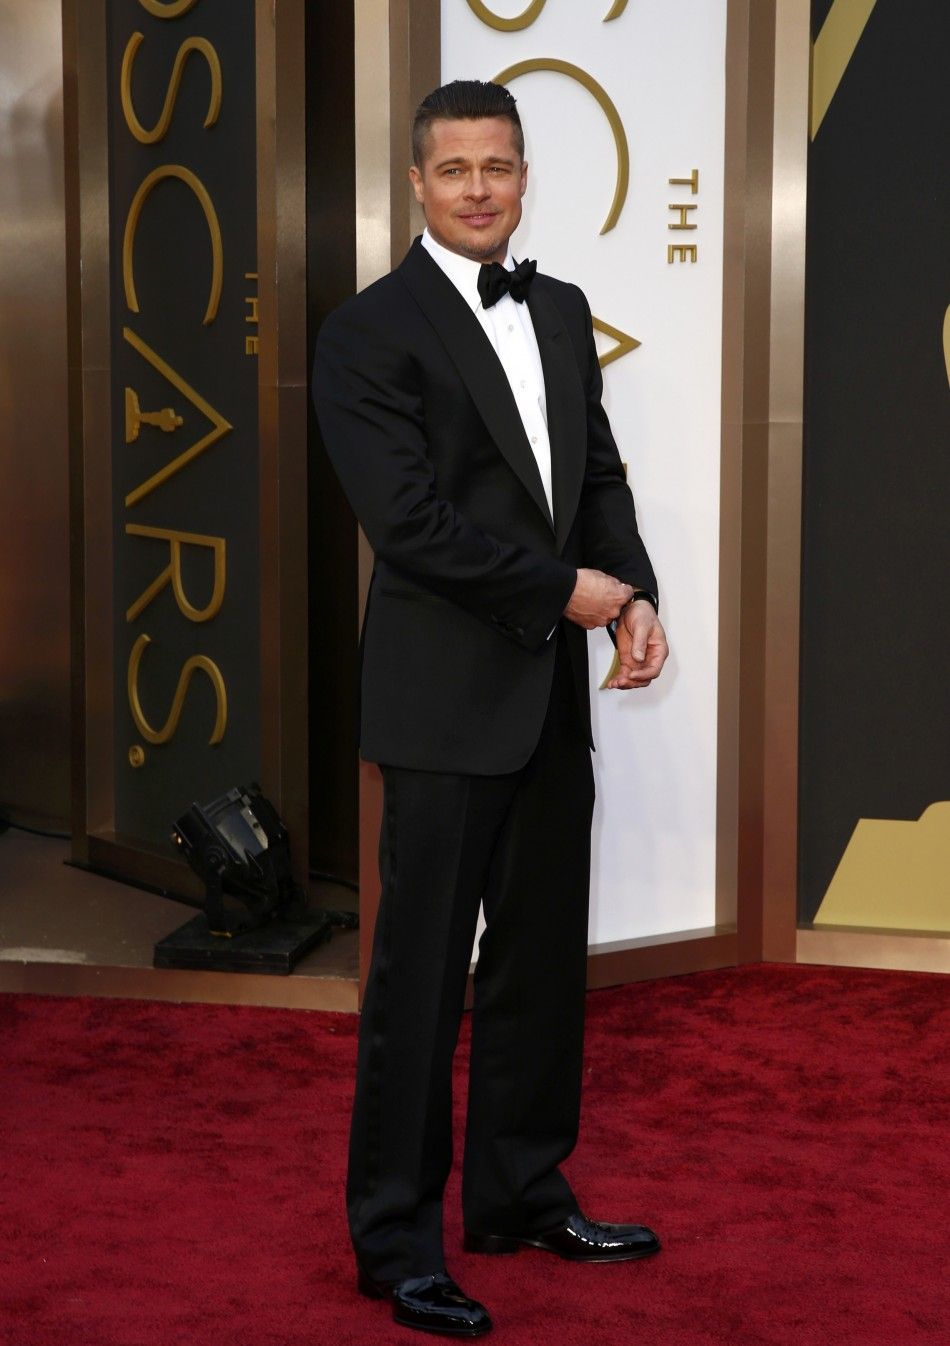 Actor Brad Pitt arrive at the 86th Academy Awards in Hollywood